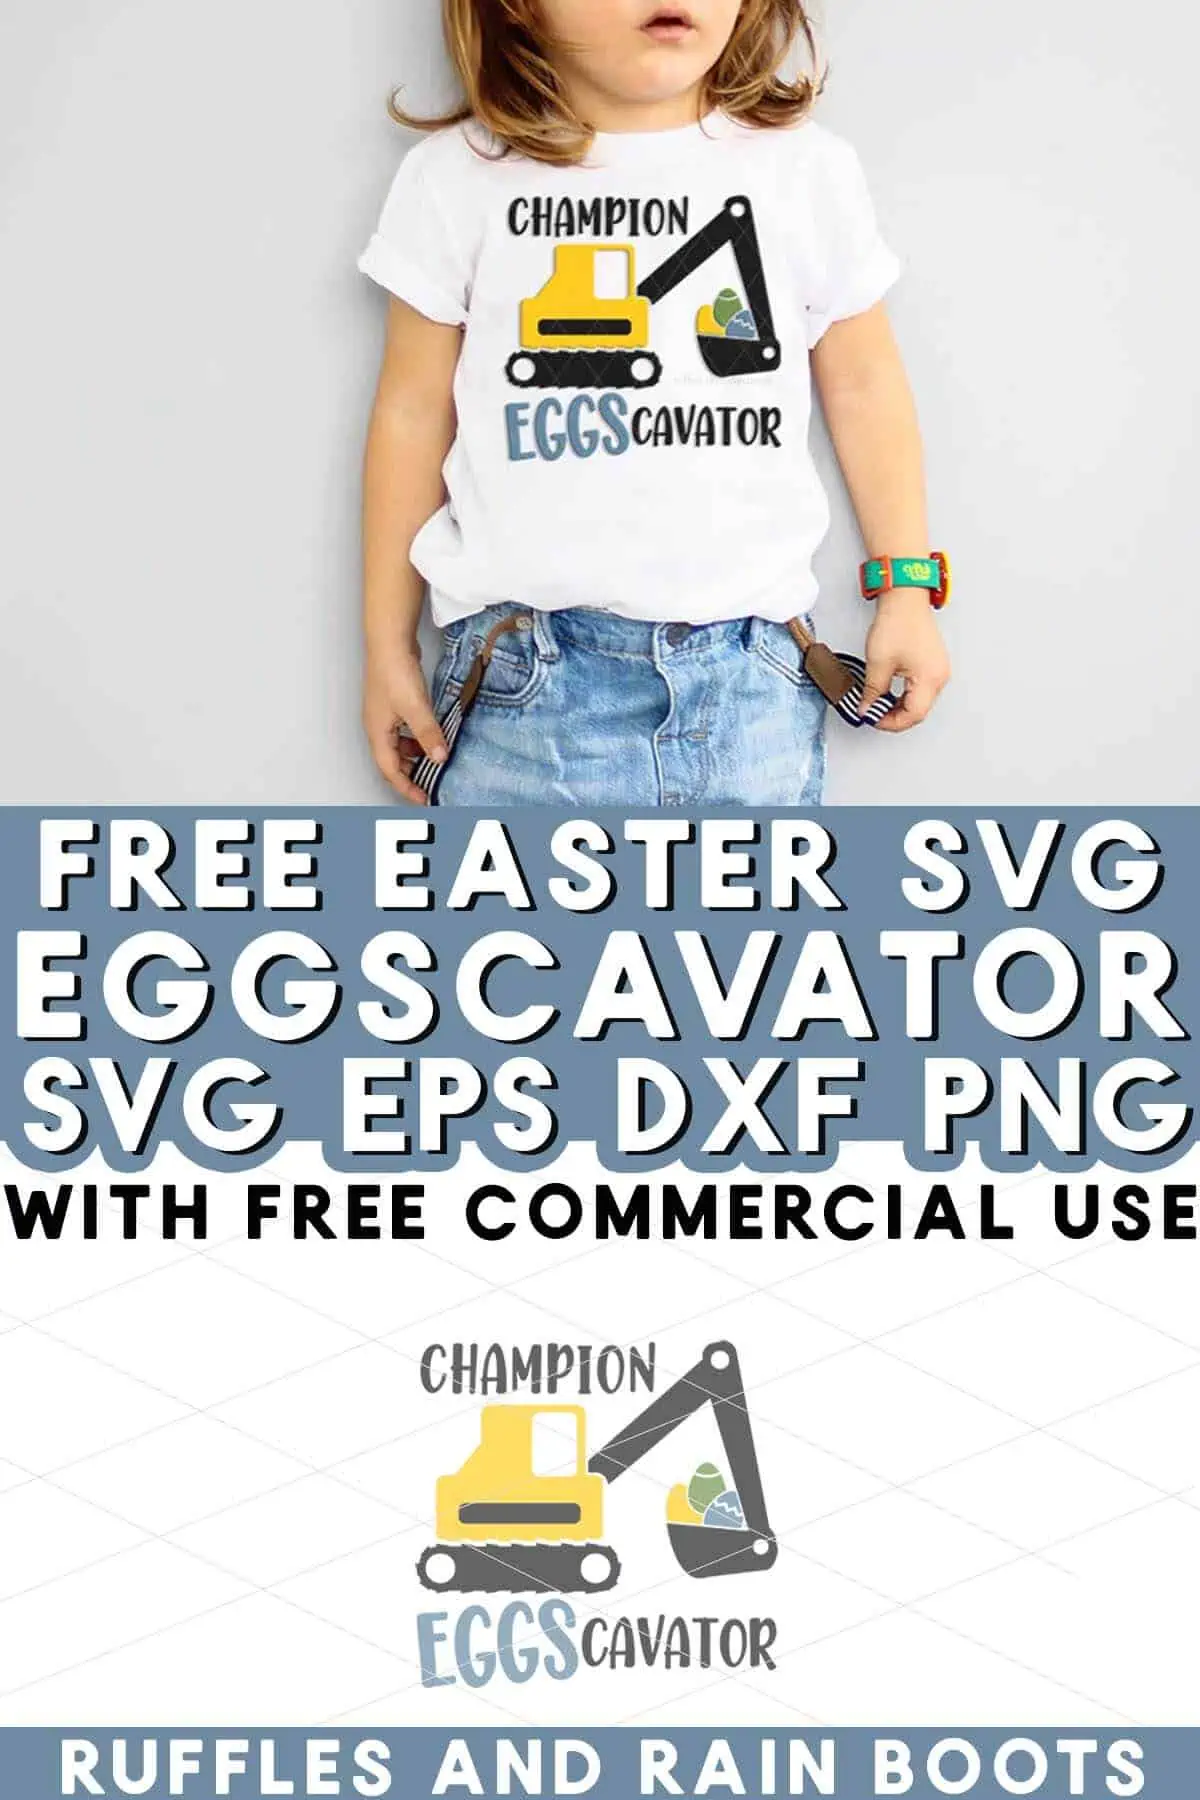 Split image of boy in jeans and white shirt which reads champion eggscavator with text which reads free Easter SVG.